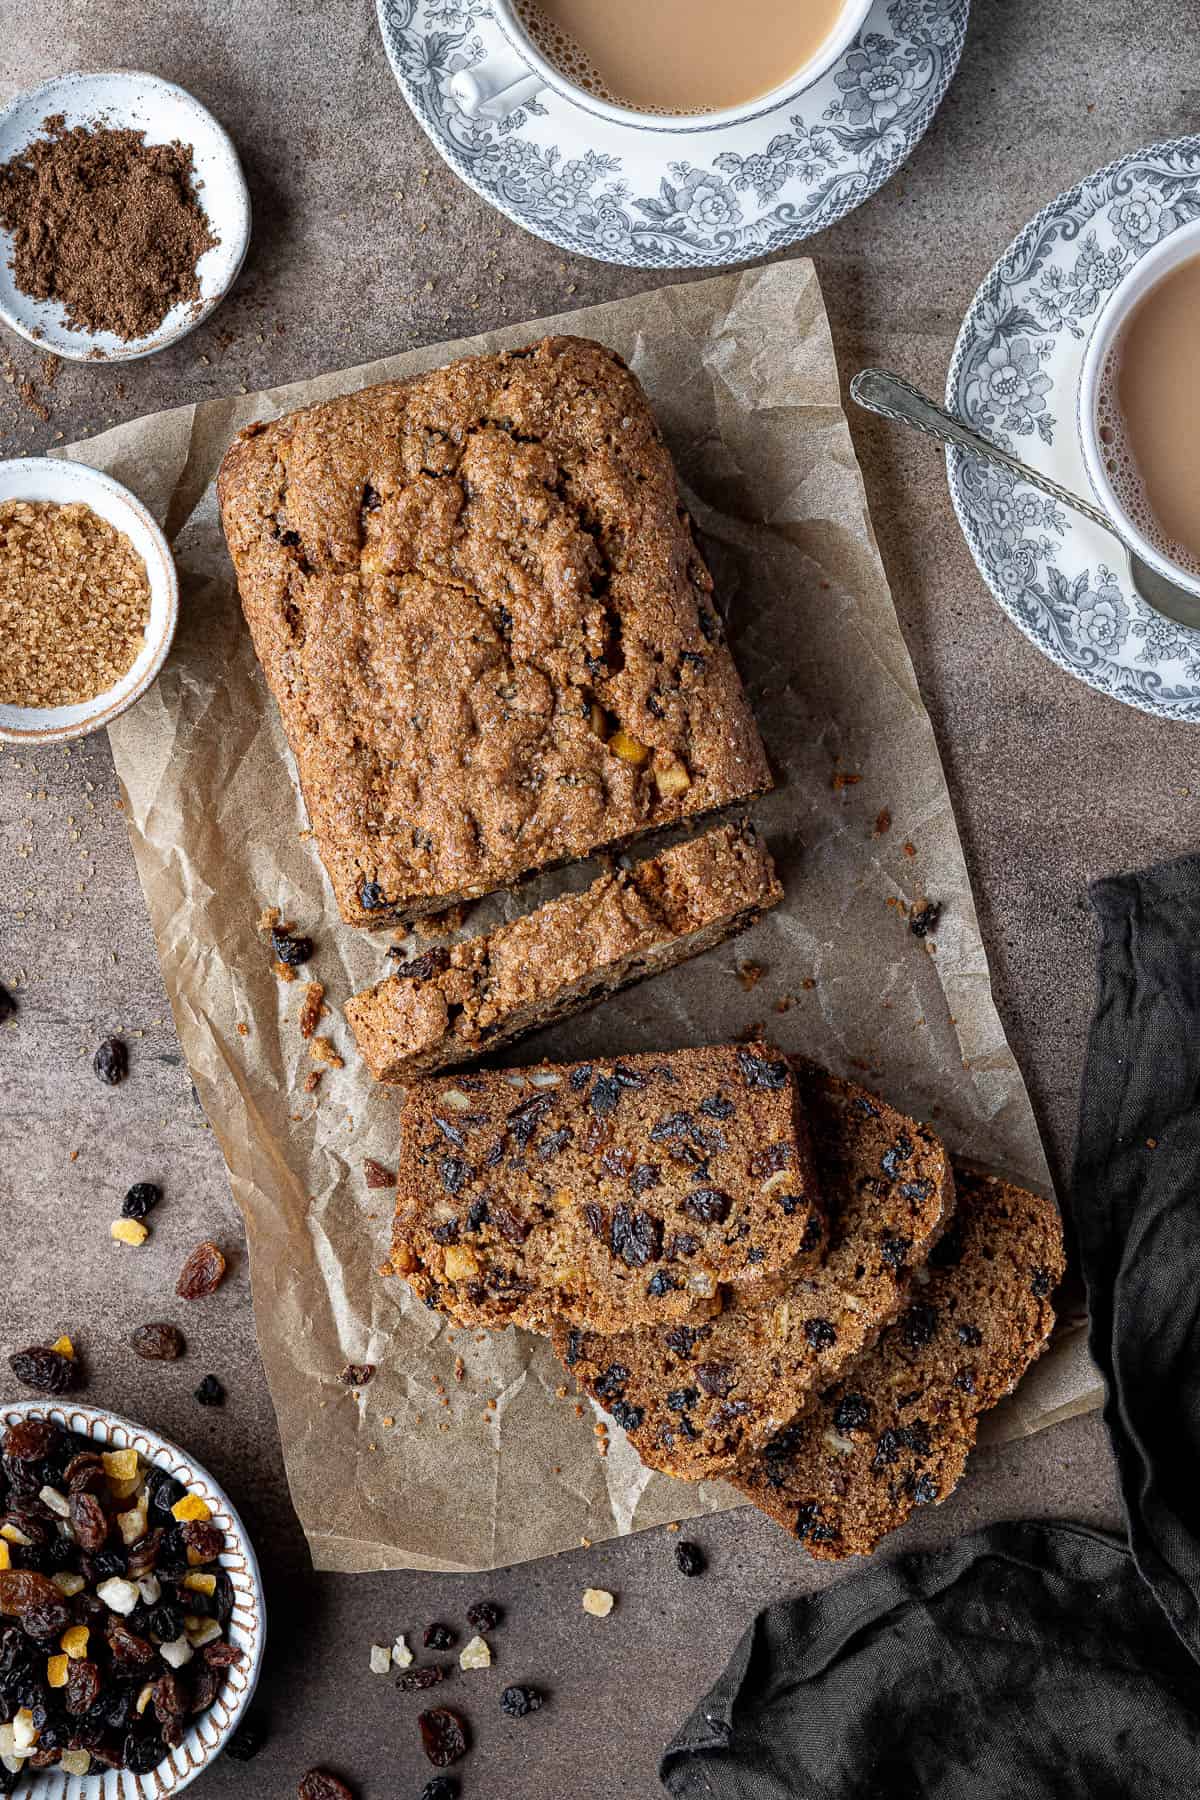 Vegan fruit cake loaf on a brown surface with cups of tea and bowls of fruit, sugar and spice.